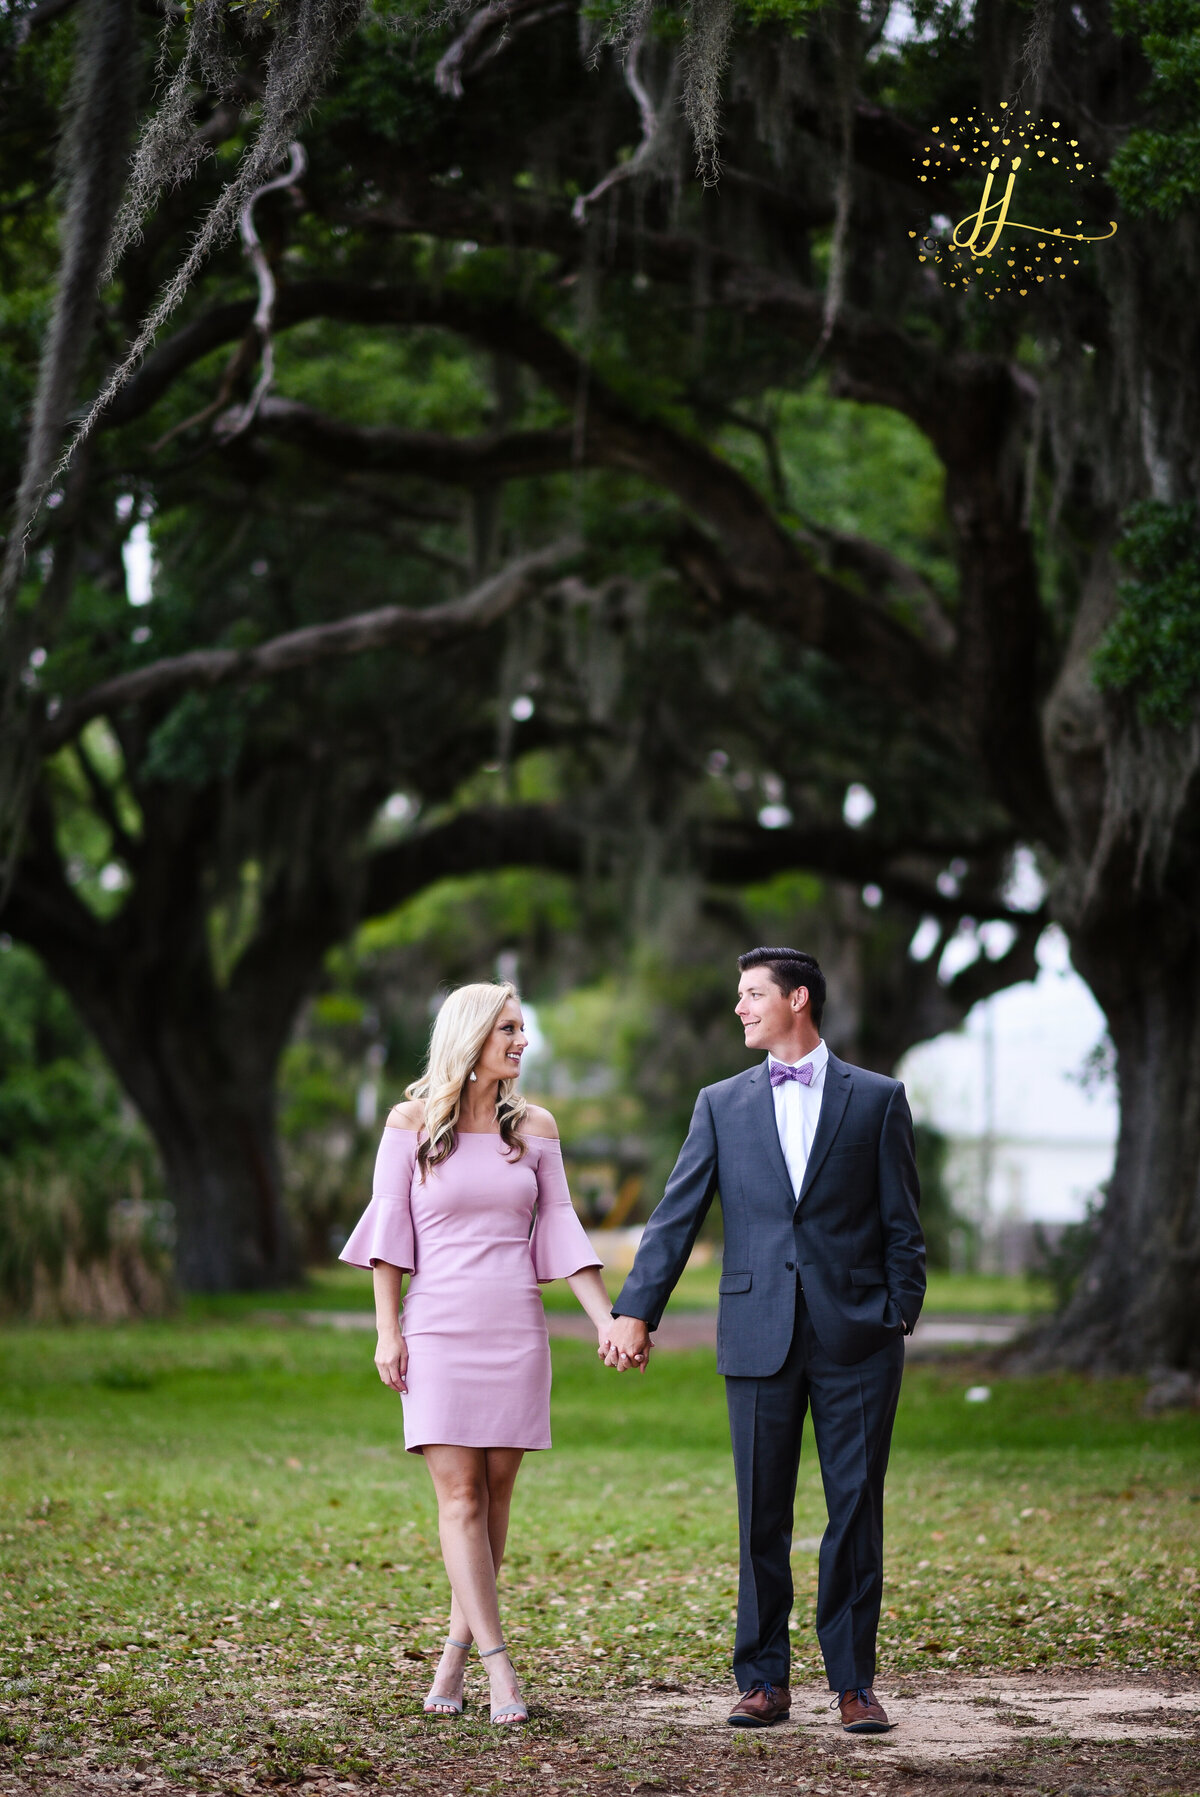 Beautiful Mississippi Engagement Photography: couple walks holding hands under oaks with Spanish Miss in Ocean Springs, MS